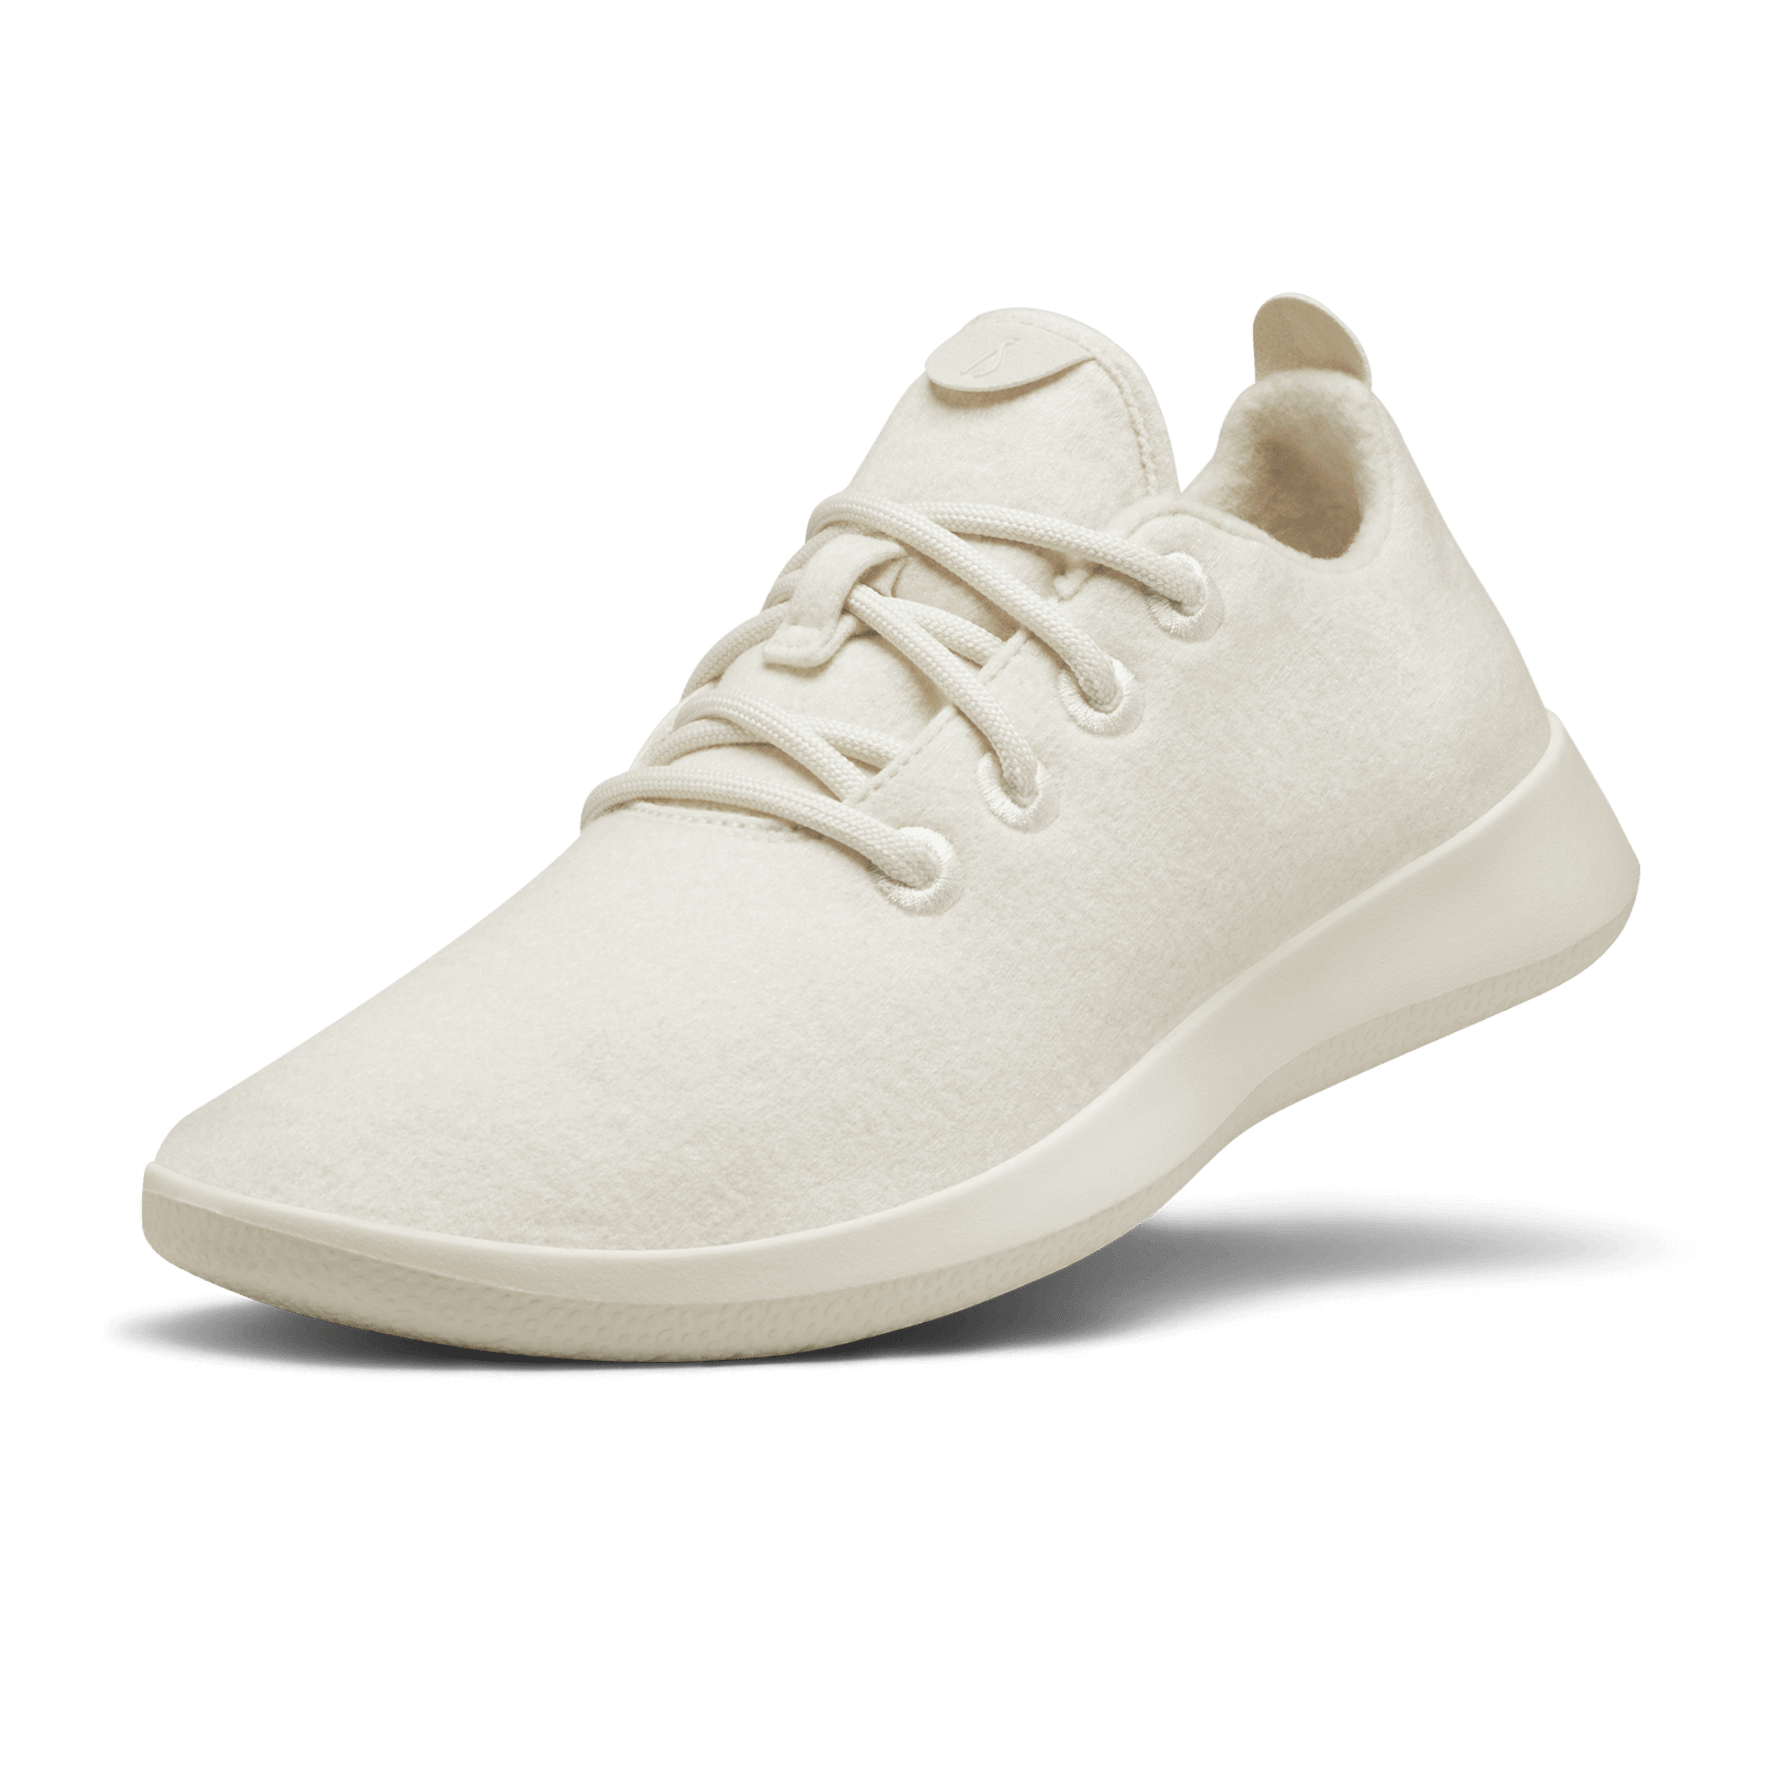 5 Dope Ways to Style Your White Sneakers in 2020 | Men fashion casual  outfits, White sneakers men, Mens casual outfits summer